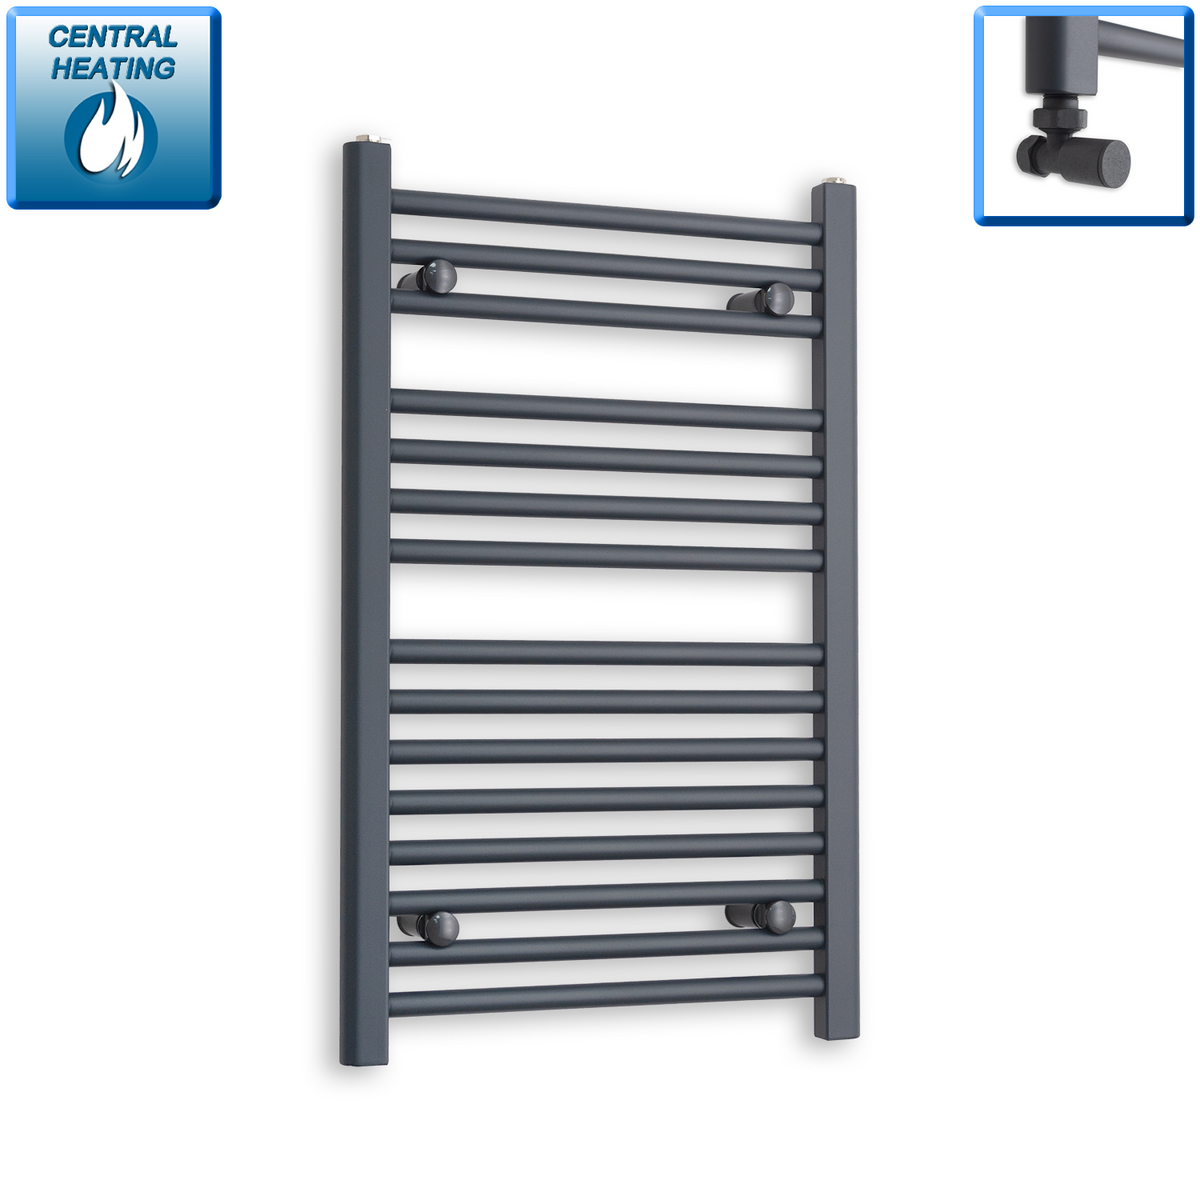 800 x 500 Heated Straight Anthracite-Sand Grey Towel Rail central heating